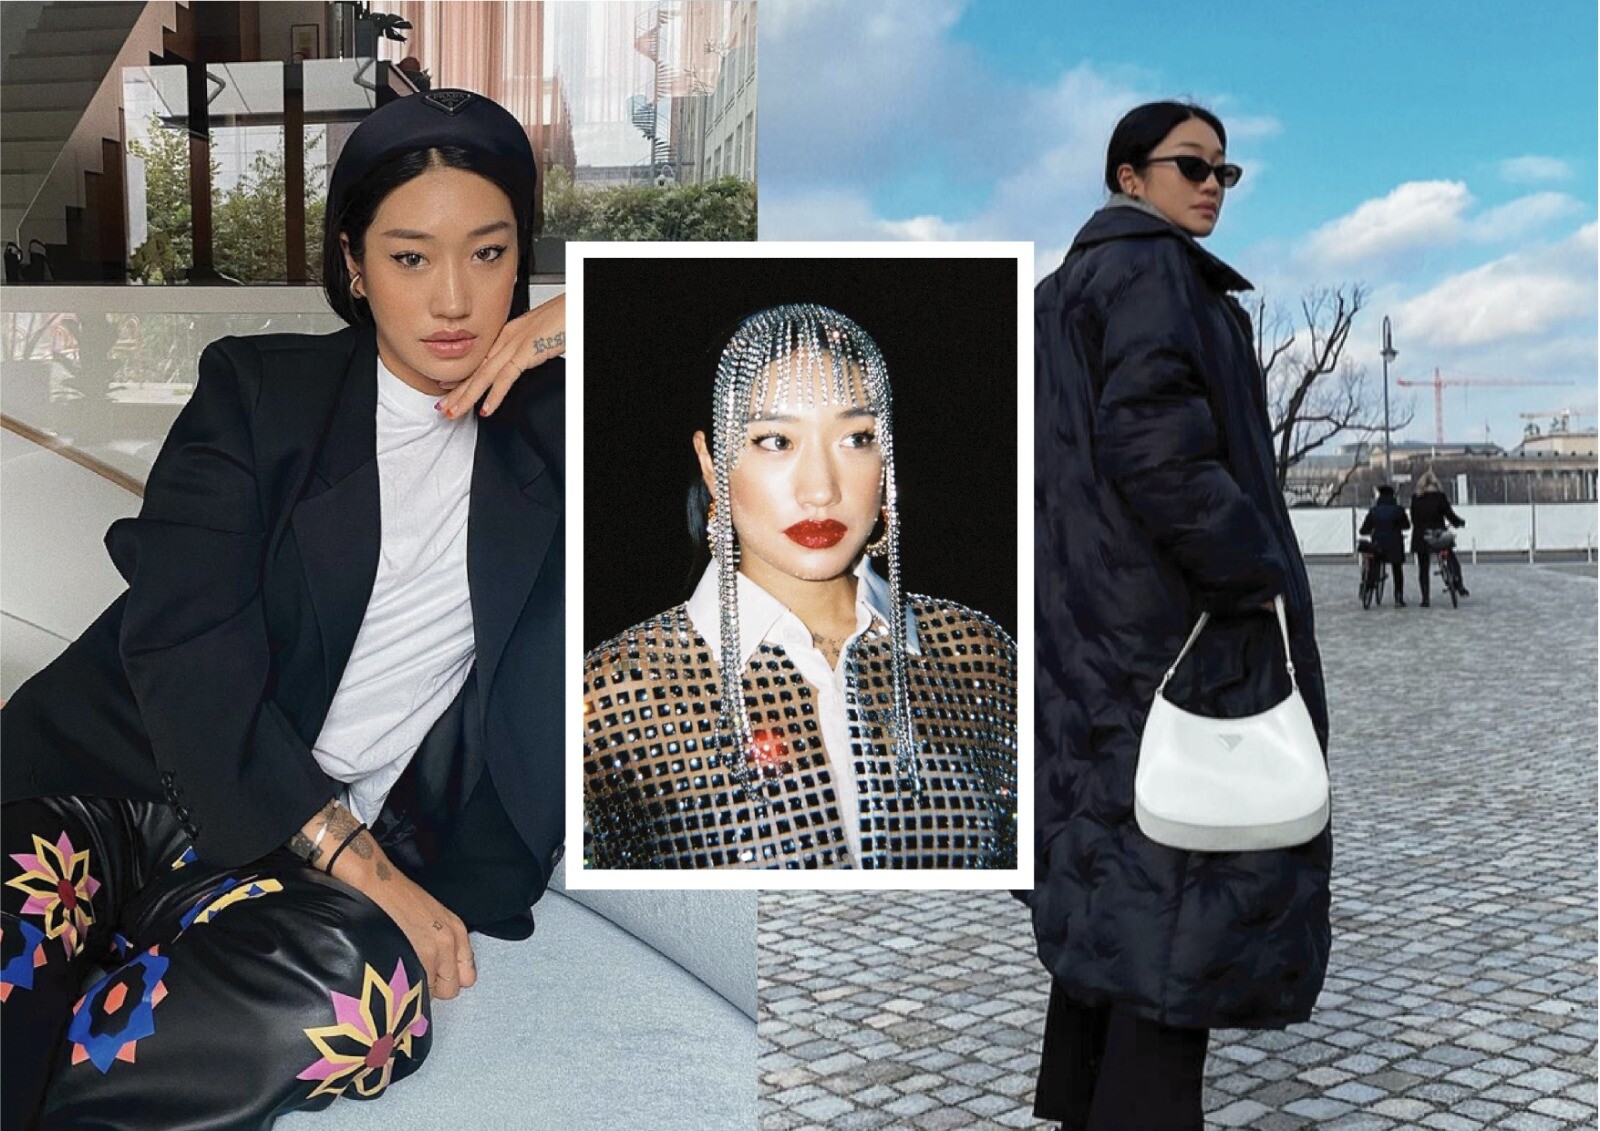 5 Reasons We Are Crushing Over Peggy Gou - Blog